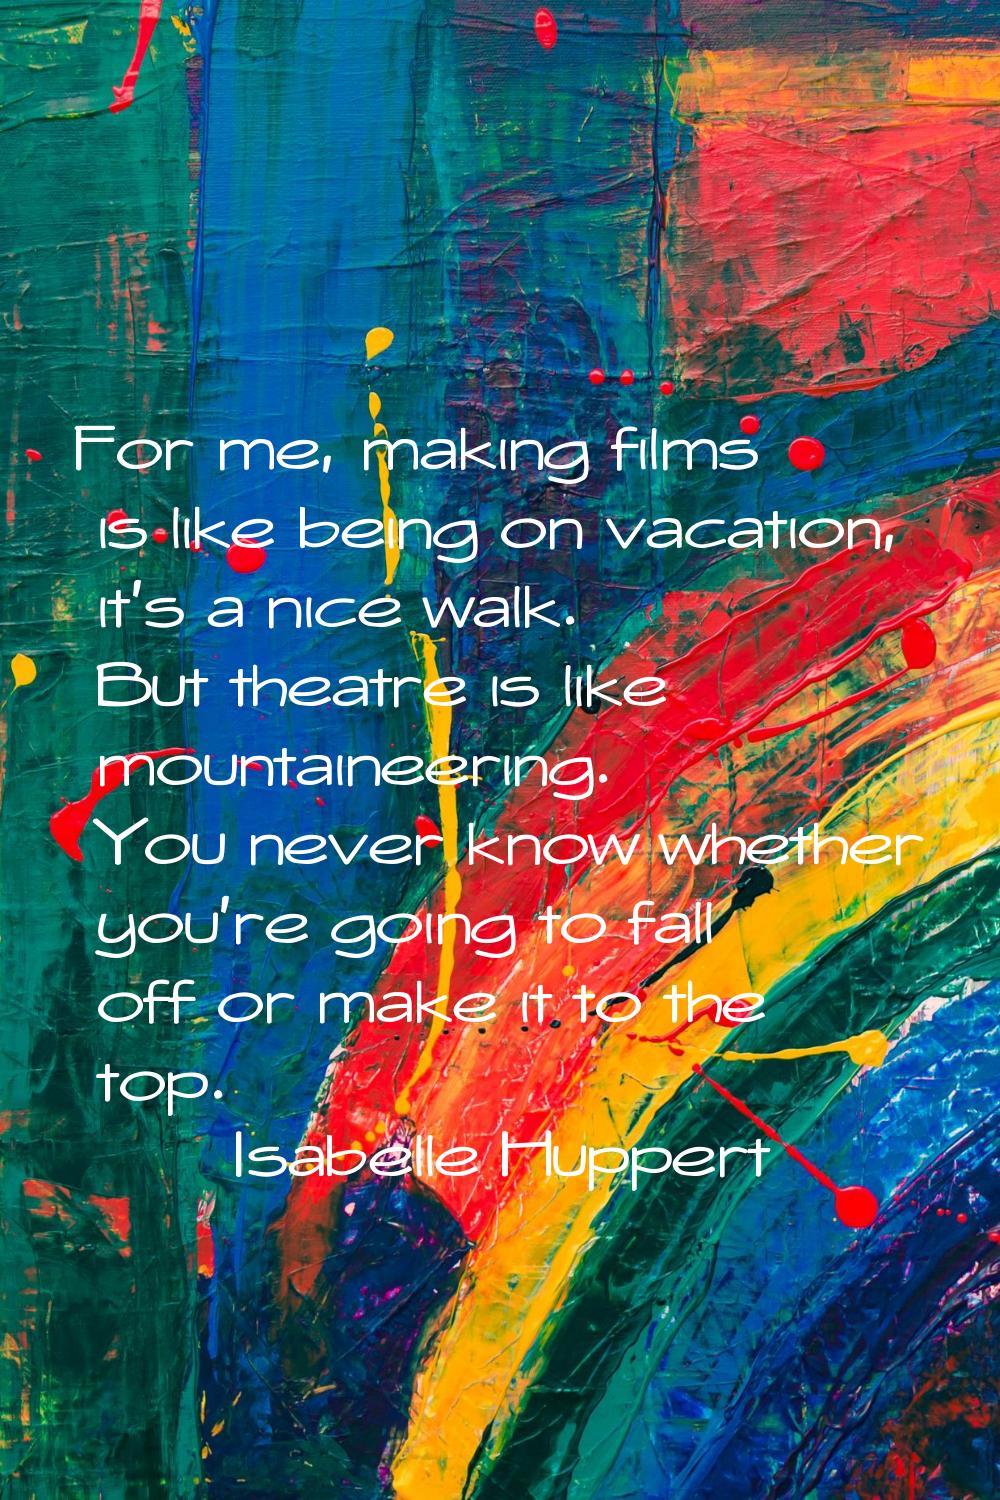 For me, making films is like being on vacation, it's a nice walk. But theatre is like mountaineerin